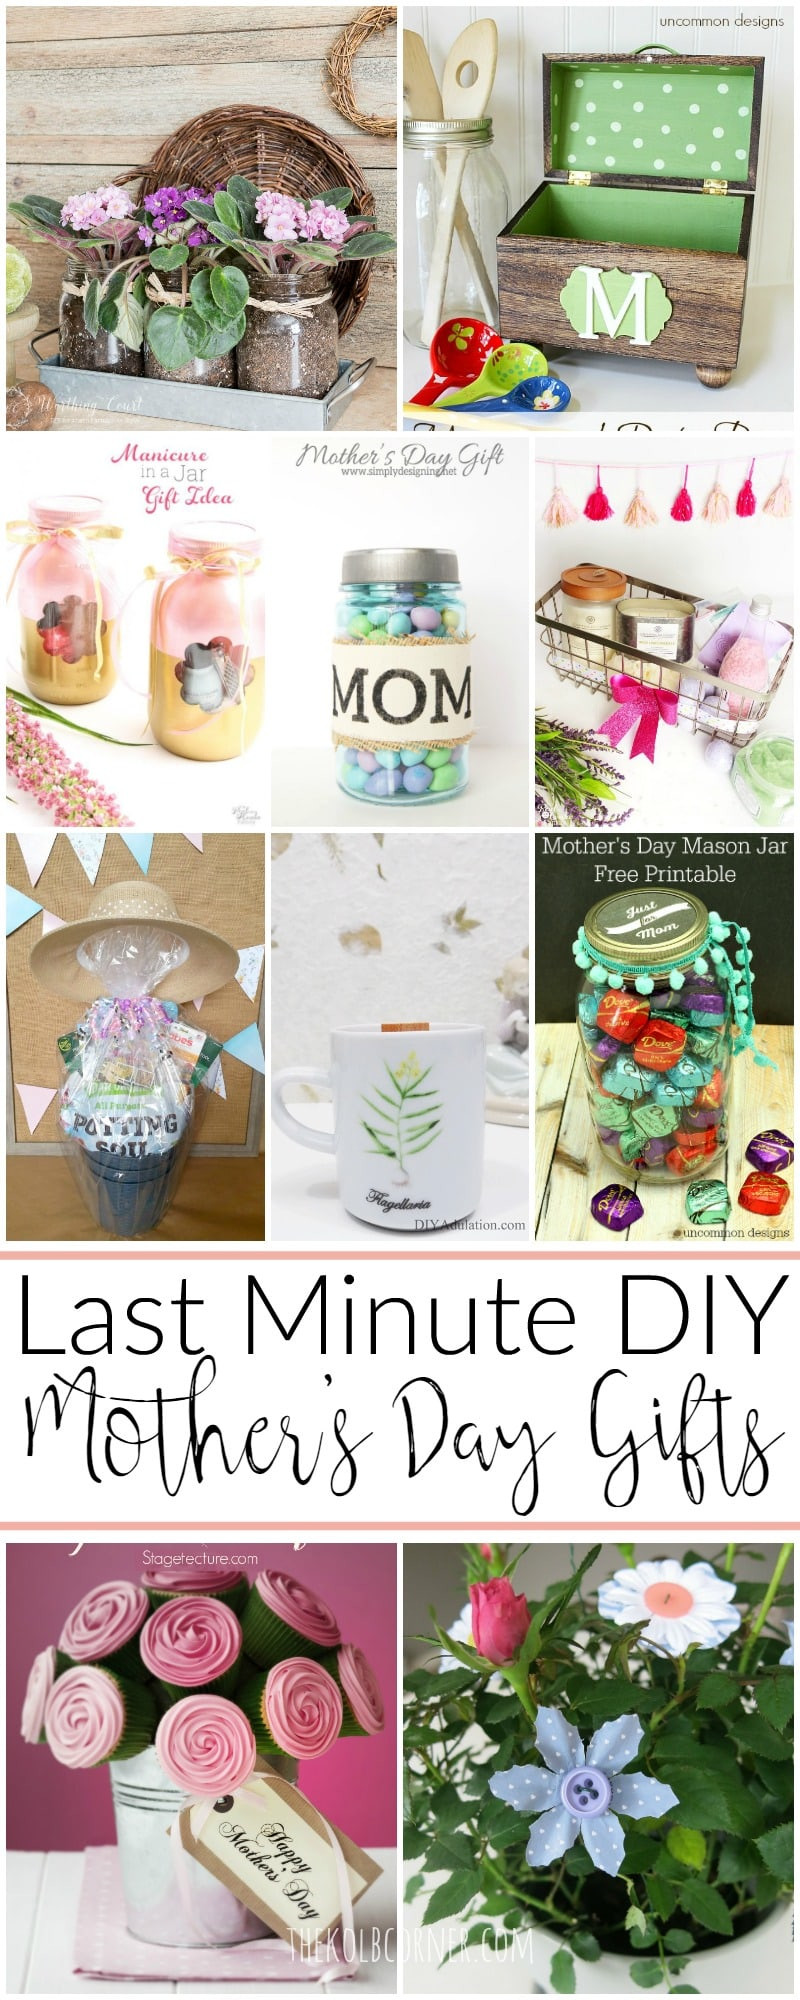 DIY Mother'S Day Gifts Pinterest
 Last Minute DIY Mother s Day Gift Ideas